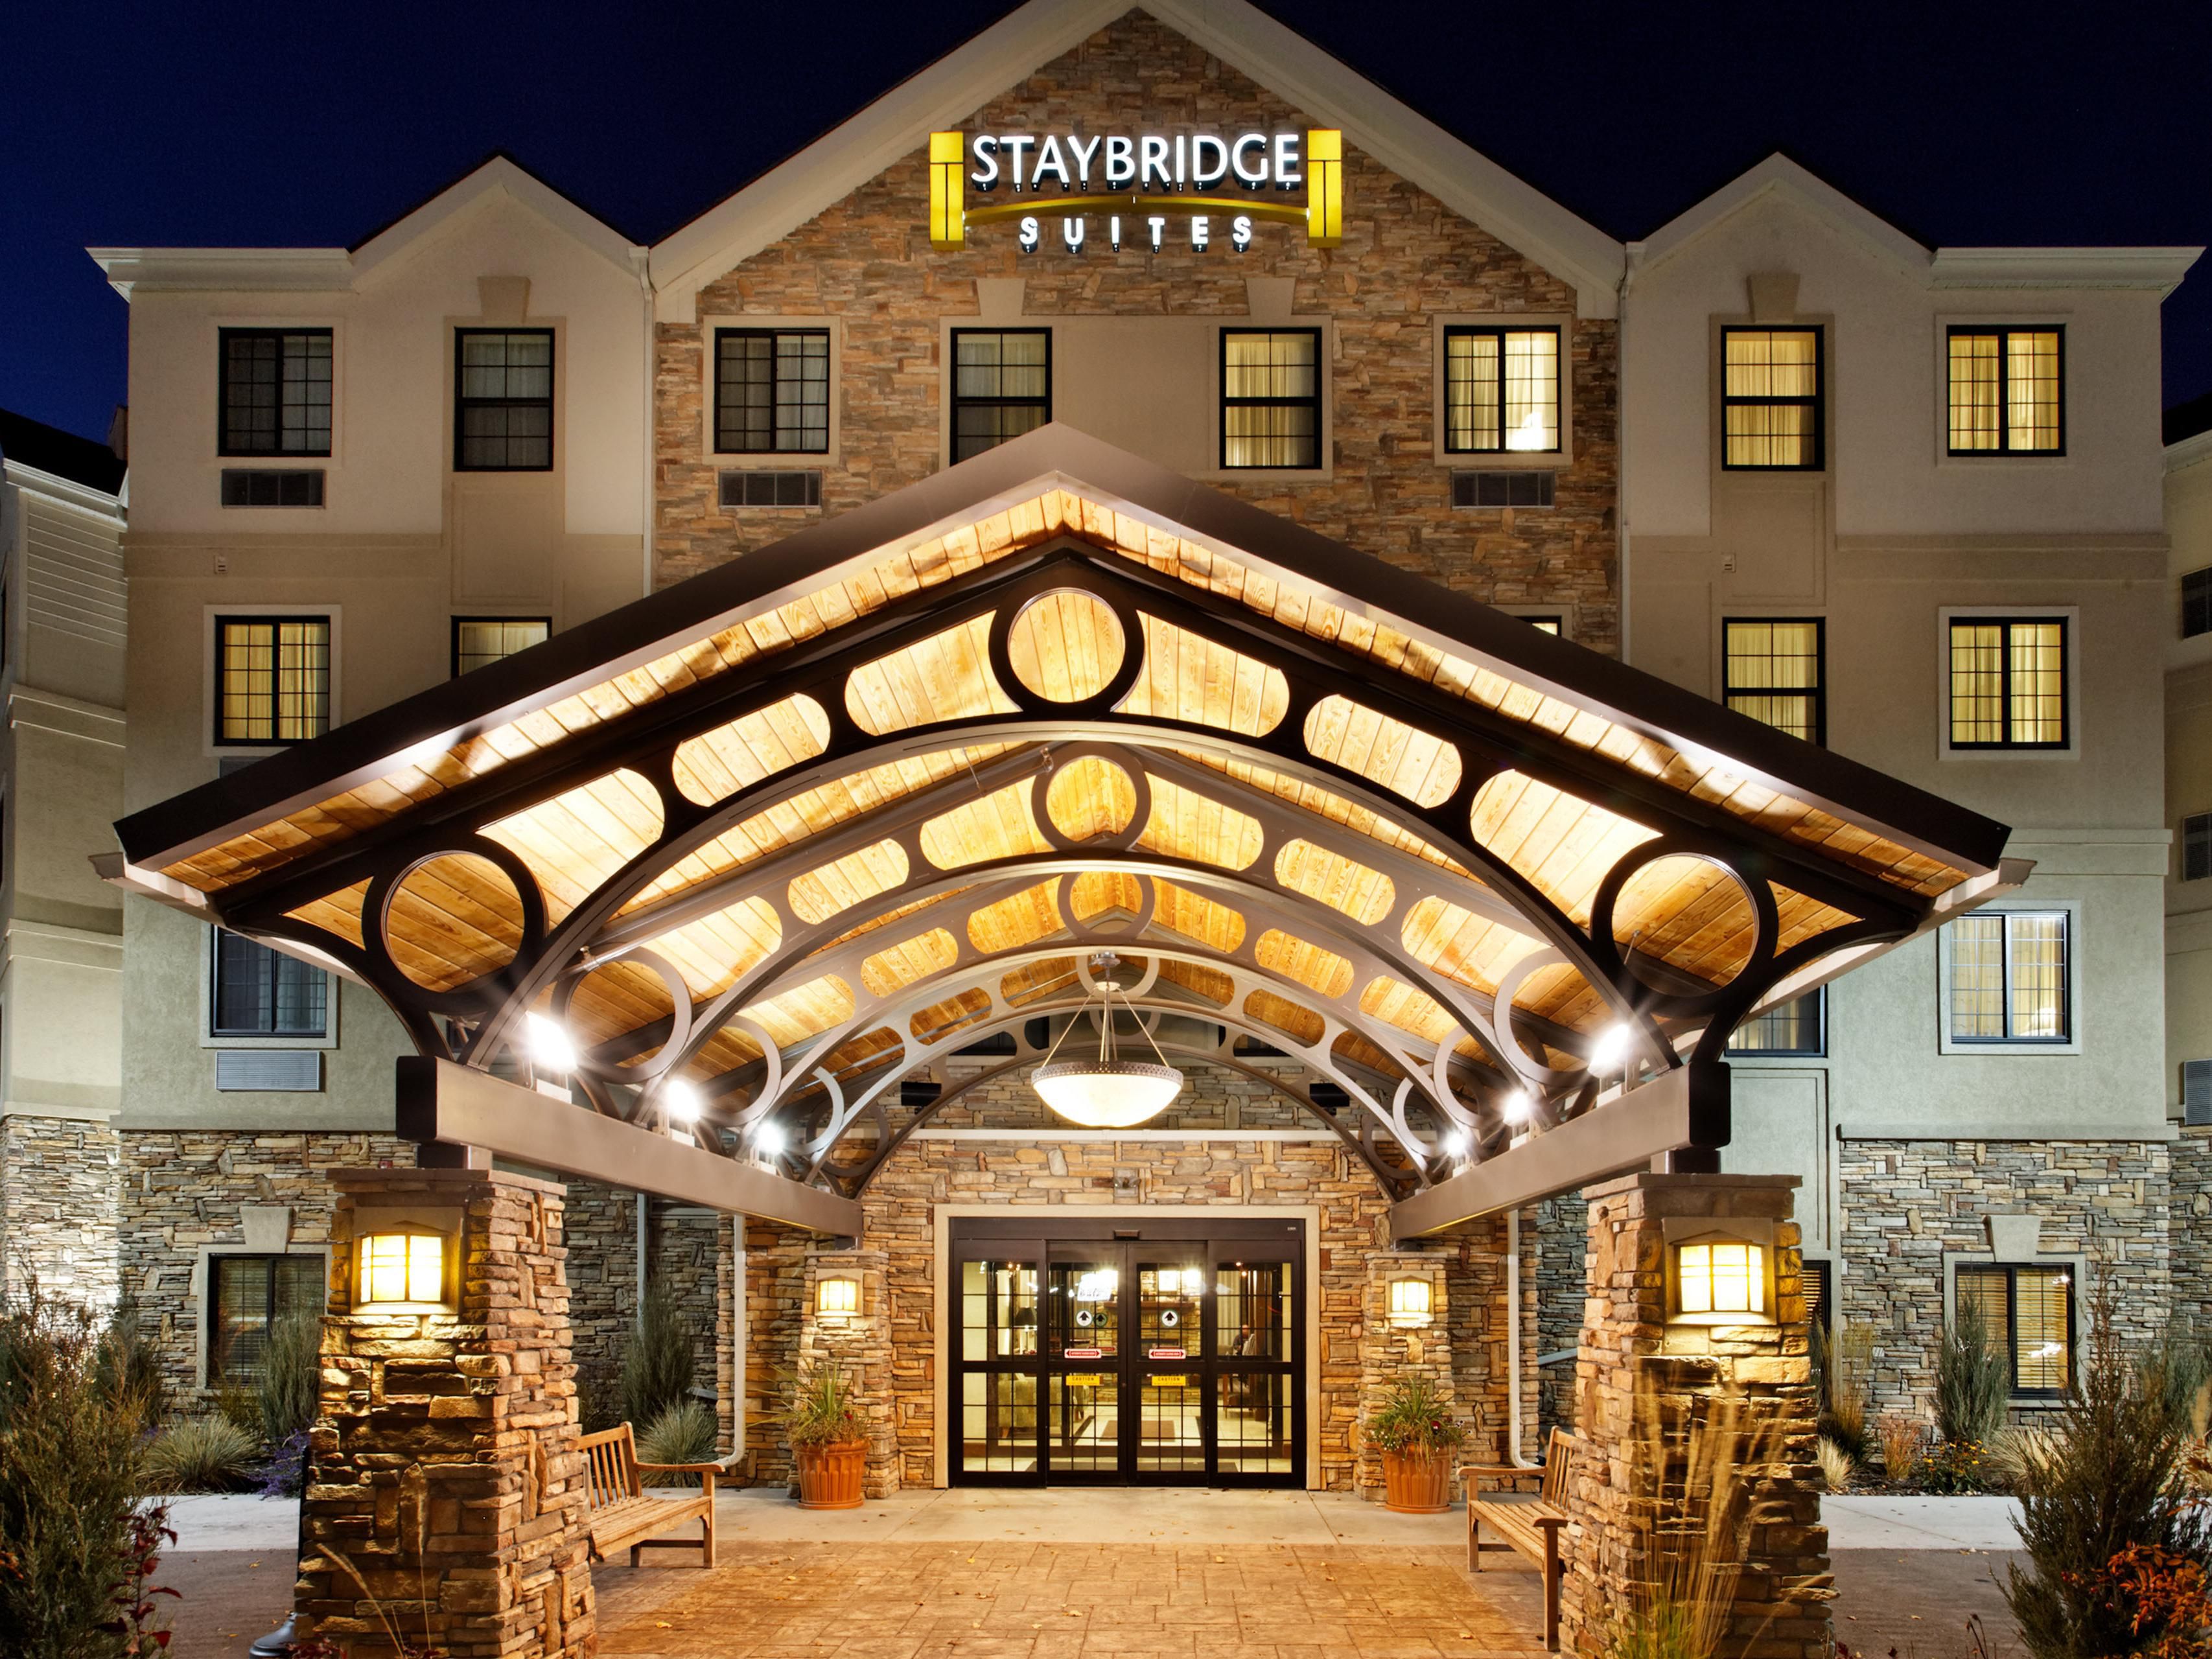 Extended Stay Hotels in Rock Hill, SC | Staybridge Suites Rock Hill